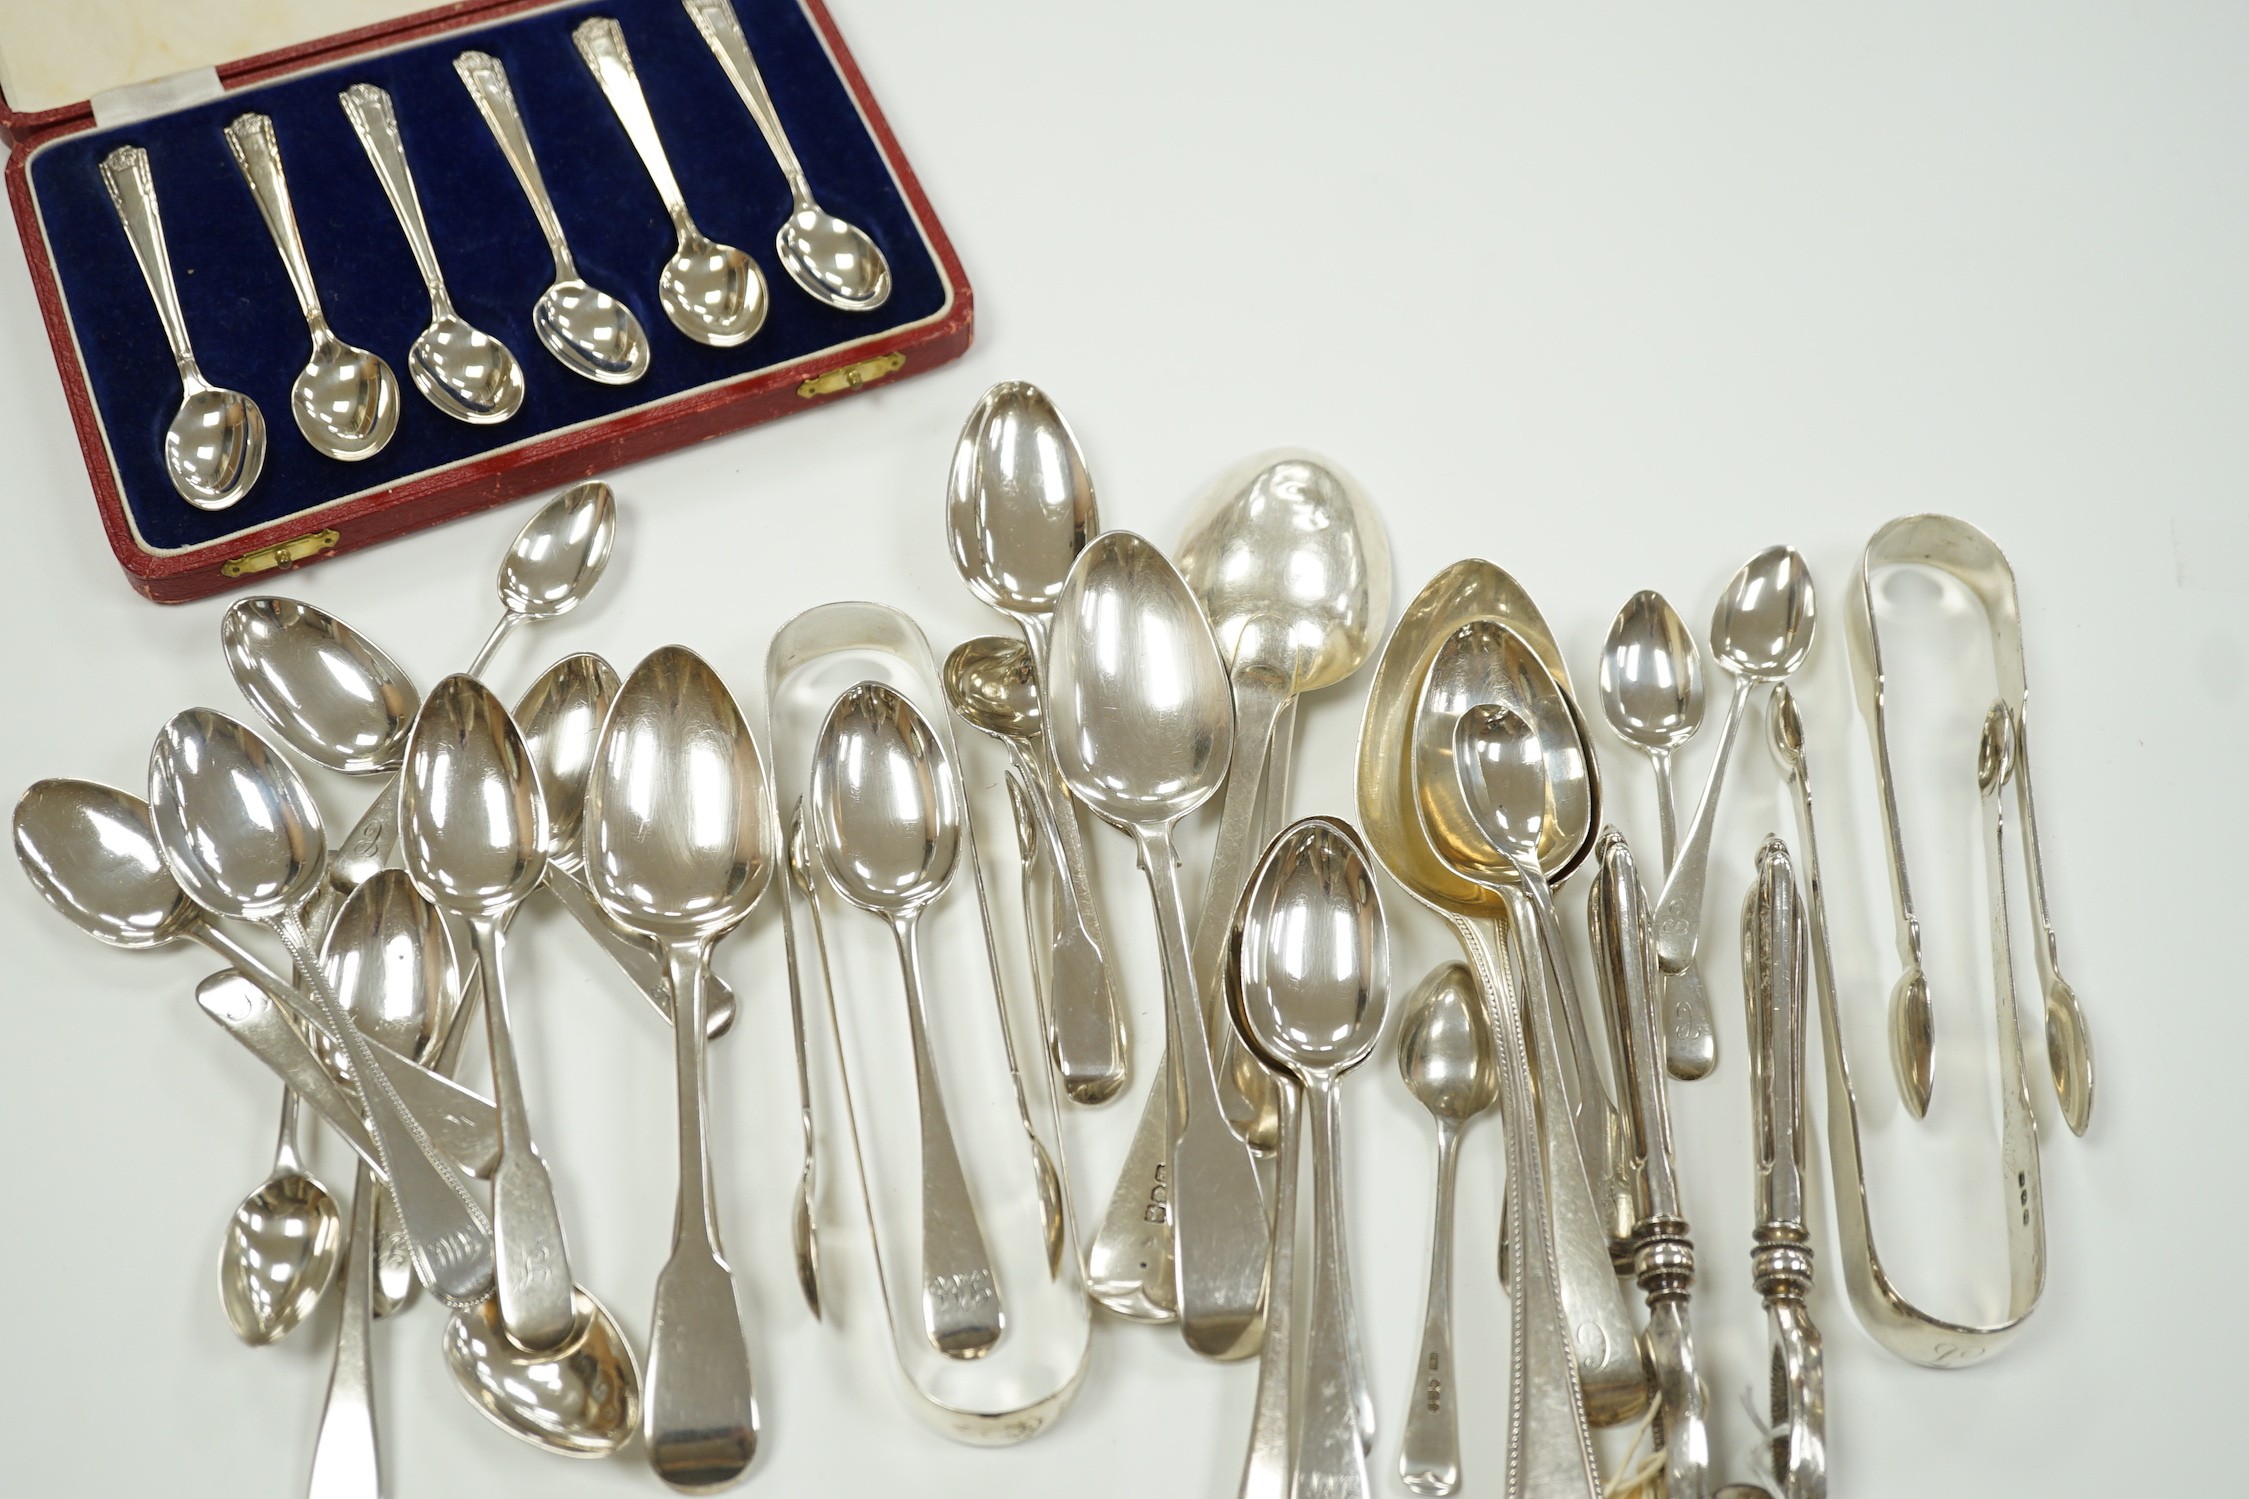 A quantity of assorted mainly 19th century silver flatware, various patterns, dates and makers, including a cased set of six 1937 Coronation silver teaspoons, four pairs of Georgian sugar tongs and a pair of Edwardian si